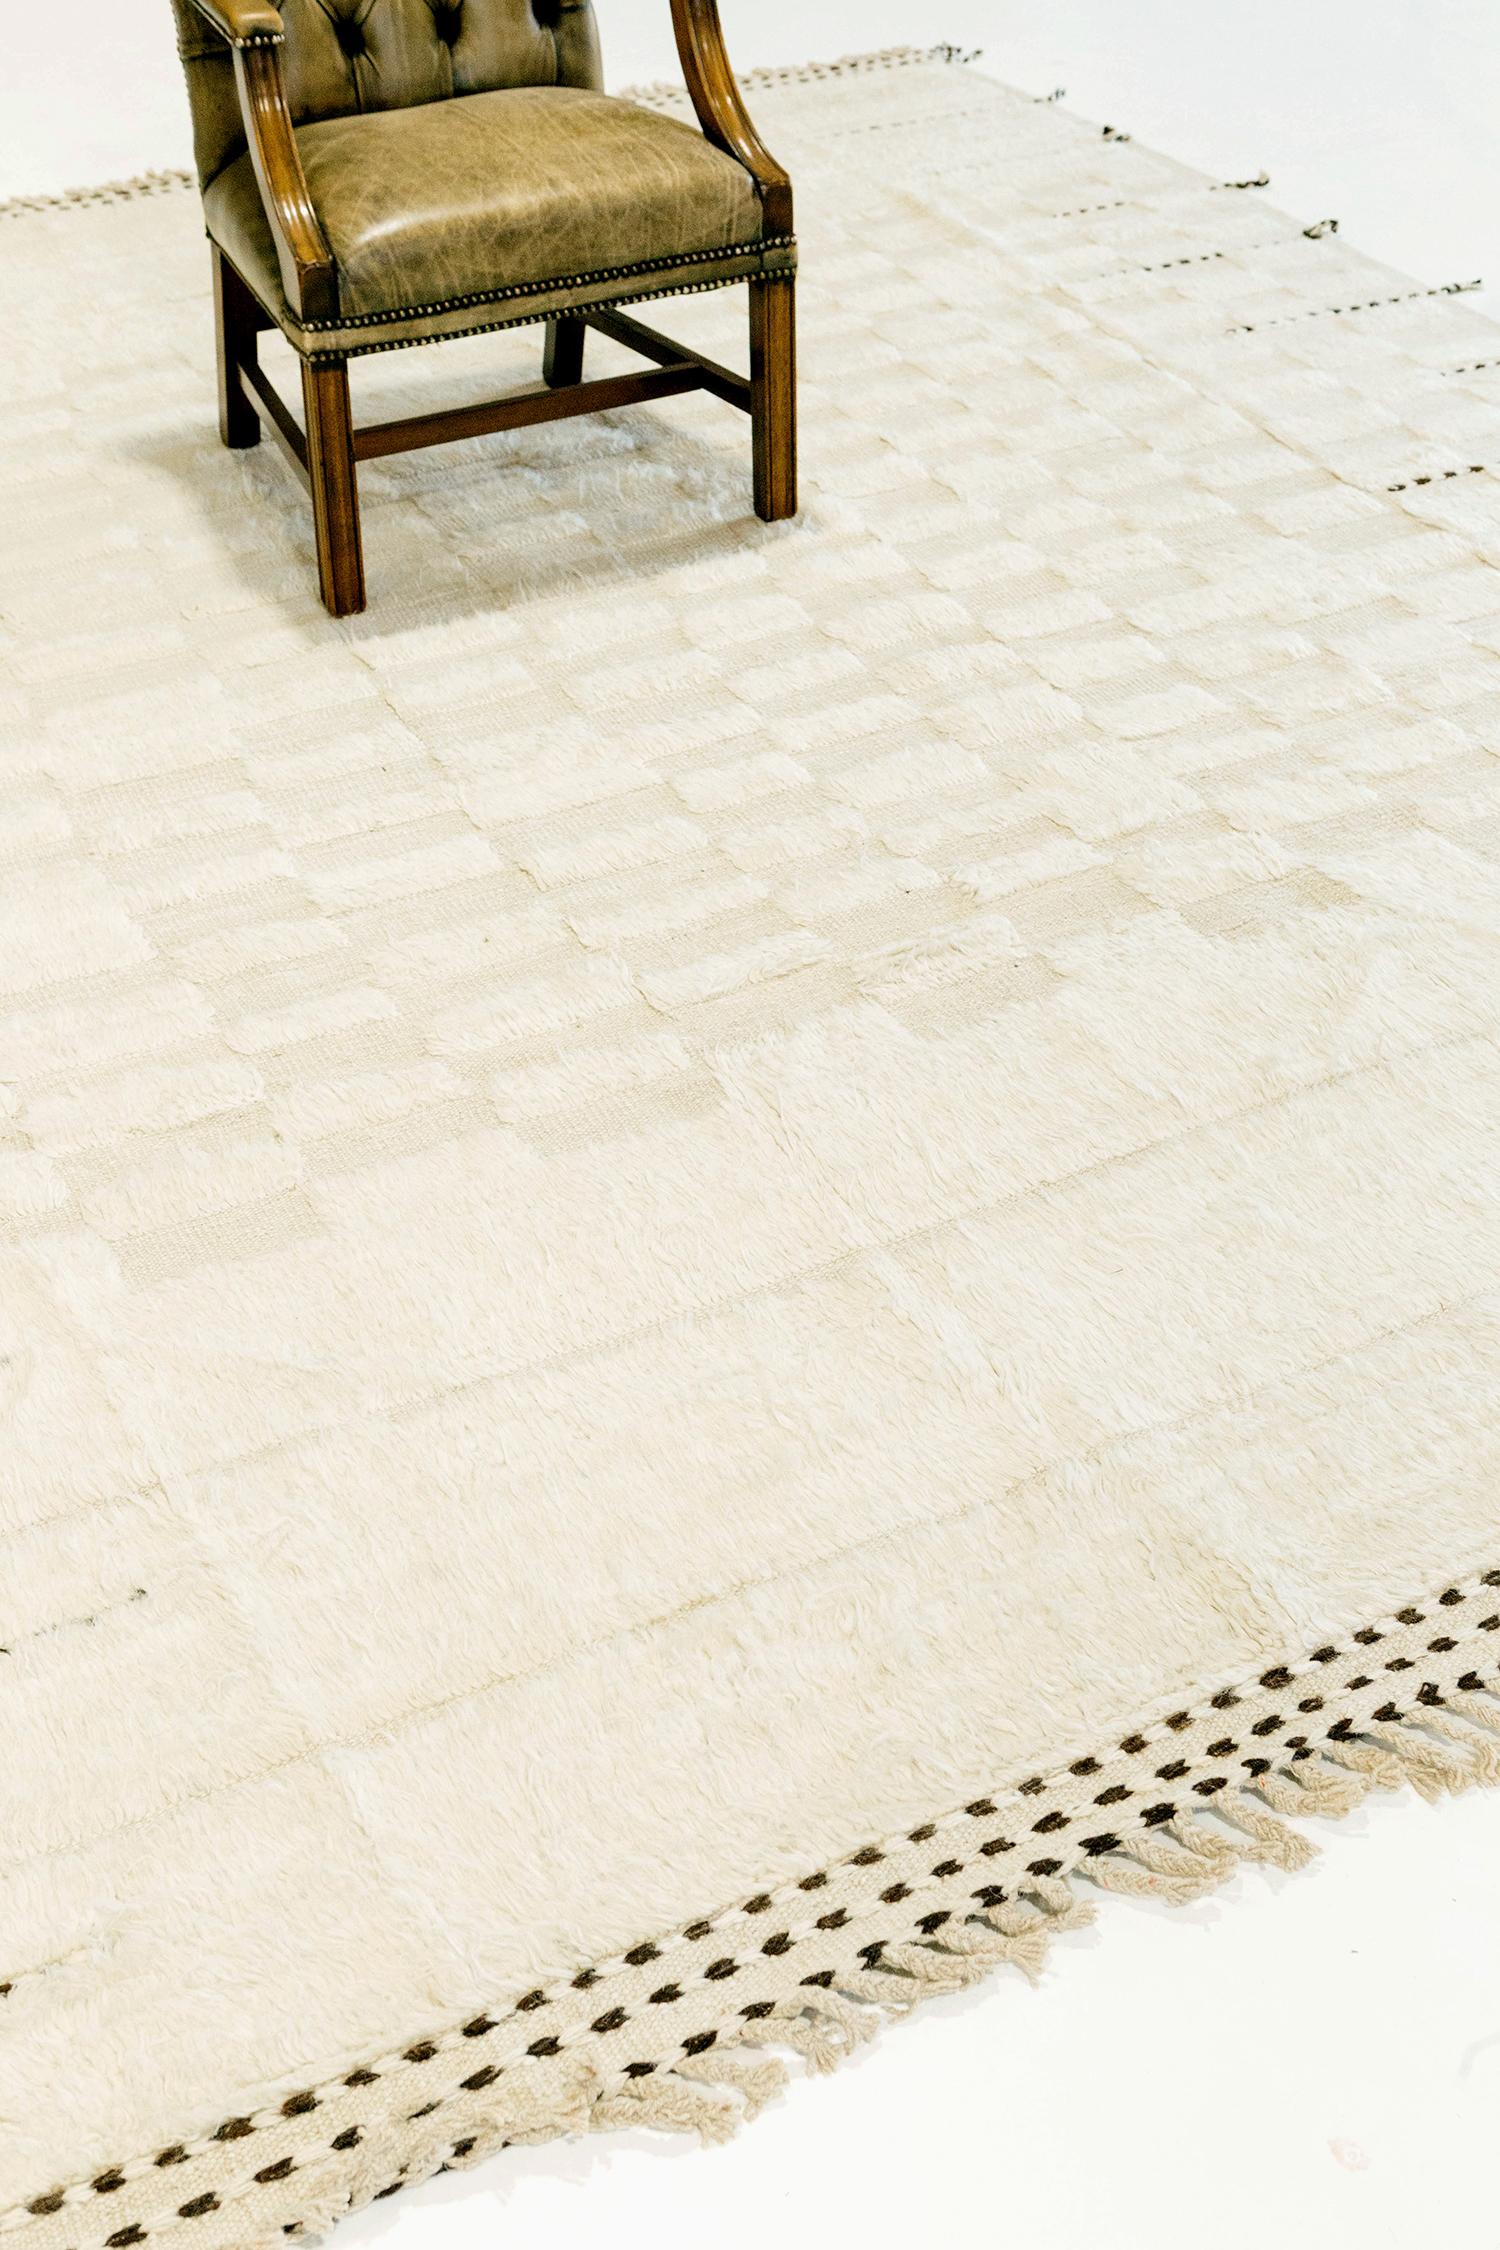 Sirocco' is a stunning handwoven white rug with embossed detailing in a checkered pattern atop a ivory pile weave. Beautiful tassels and bordered designs add a timely and one of a kind essence for the modern design world. Haute Bohemian Collection: